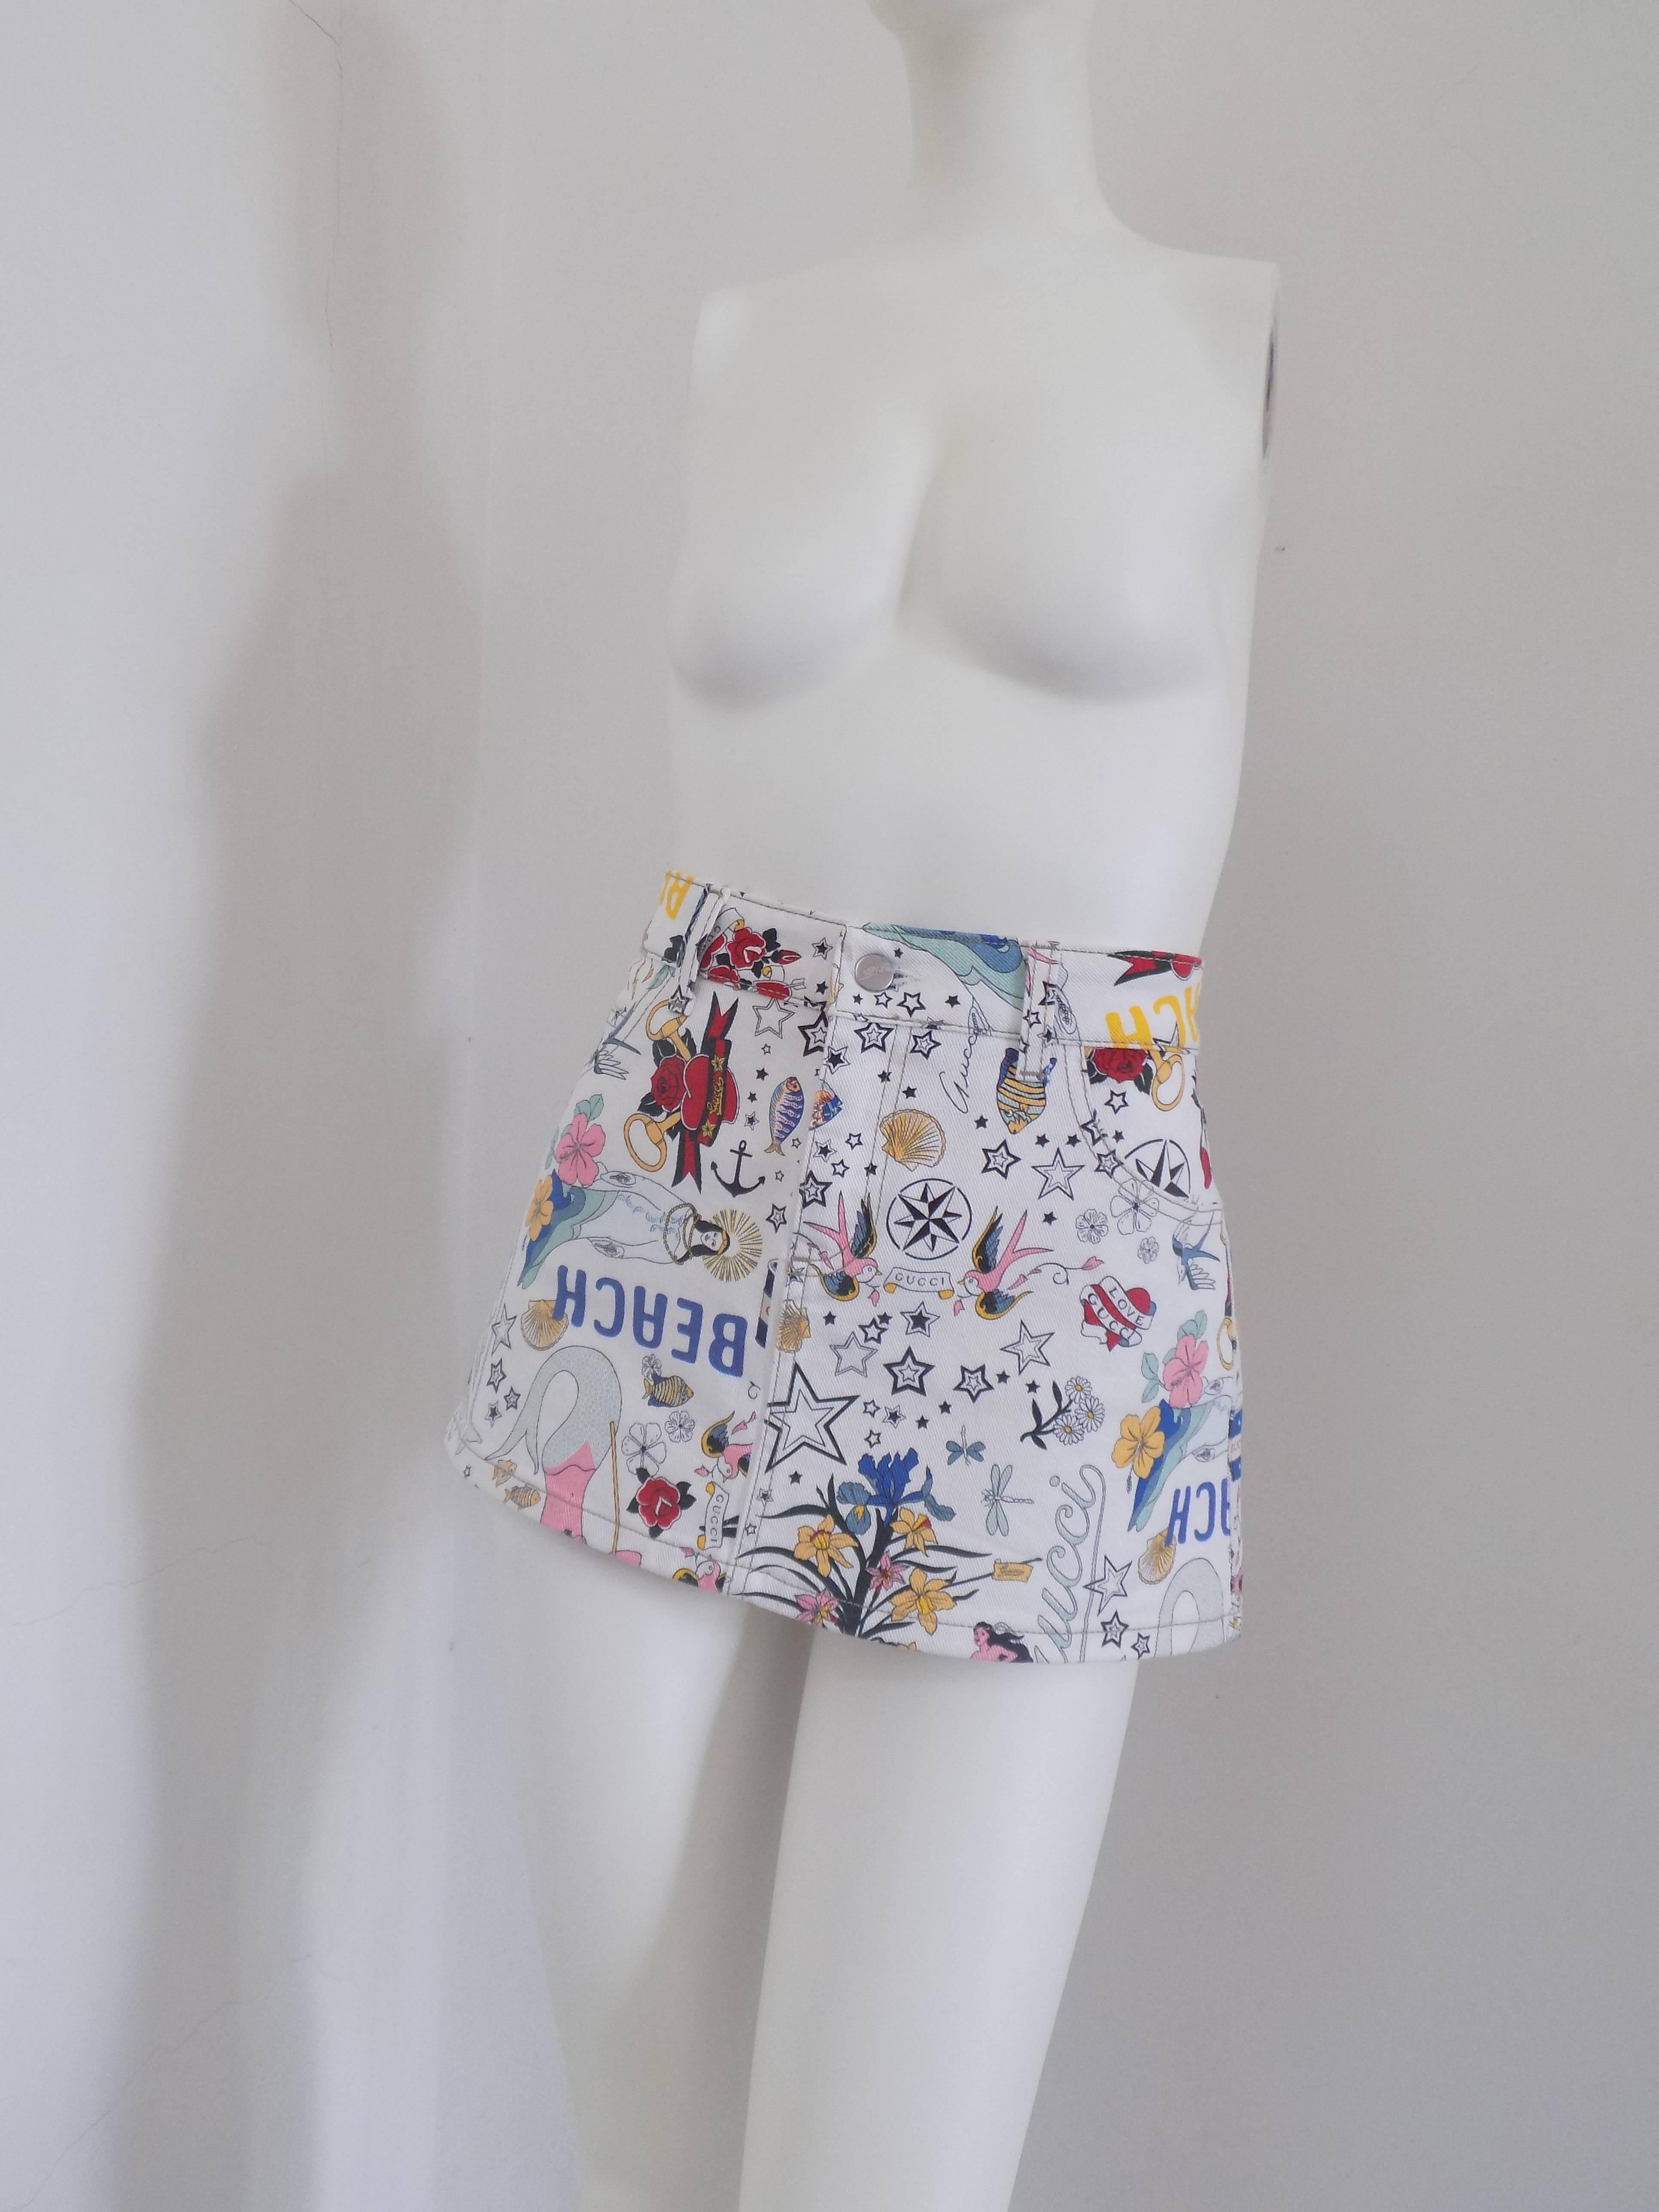 Gucci limited edition Skirt
totally made in italy in italian size range 42